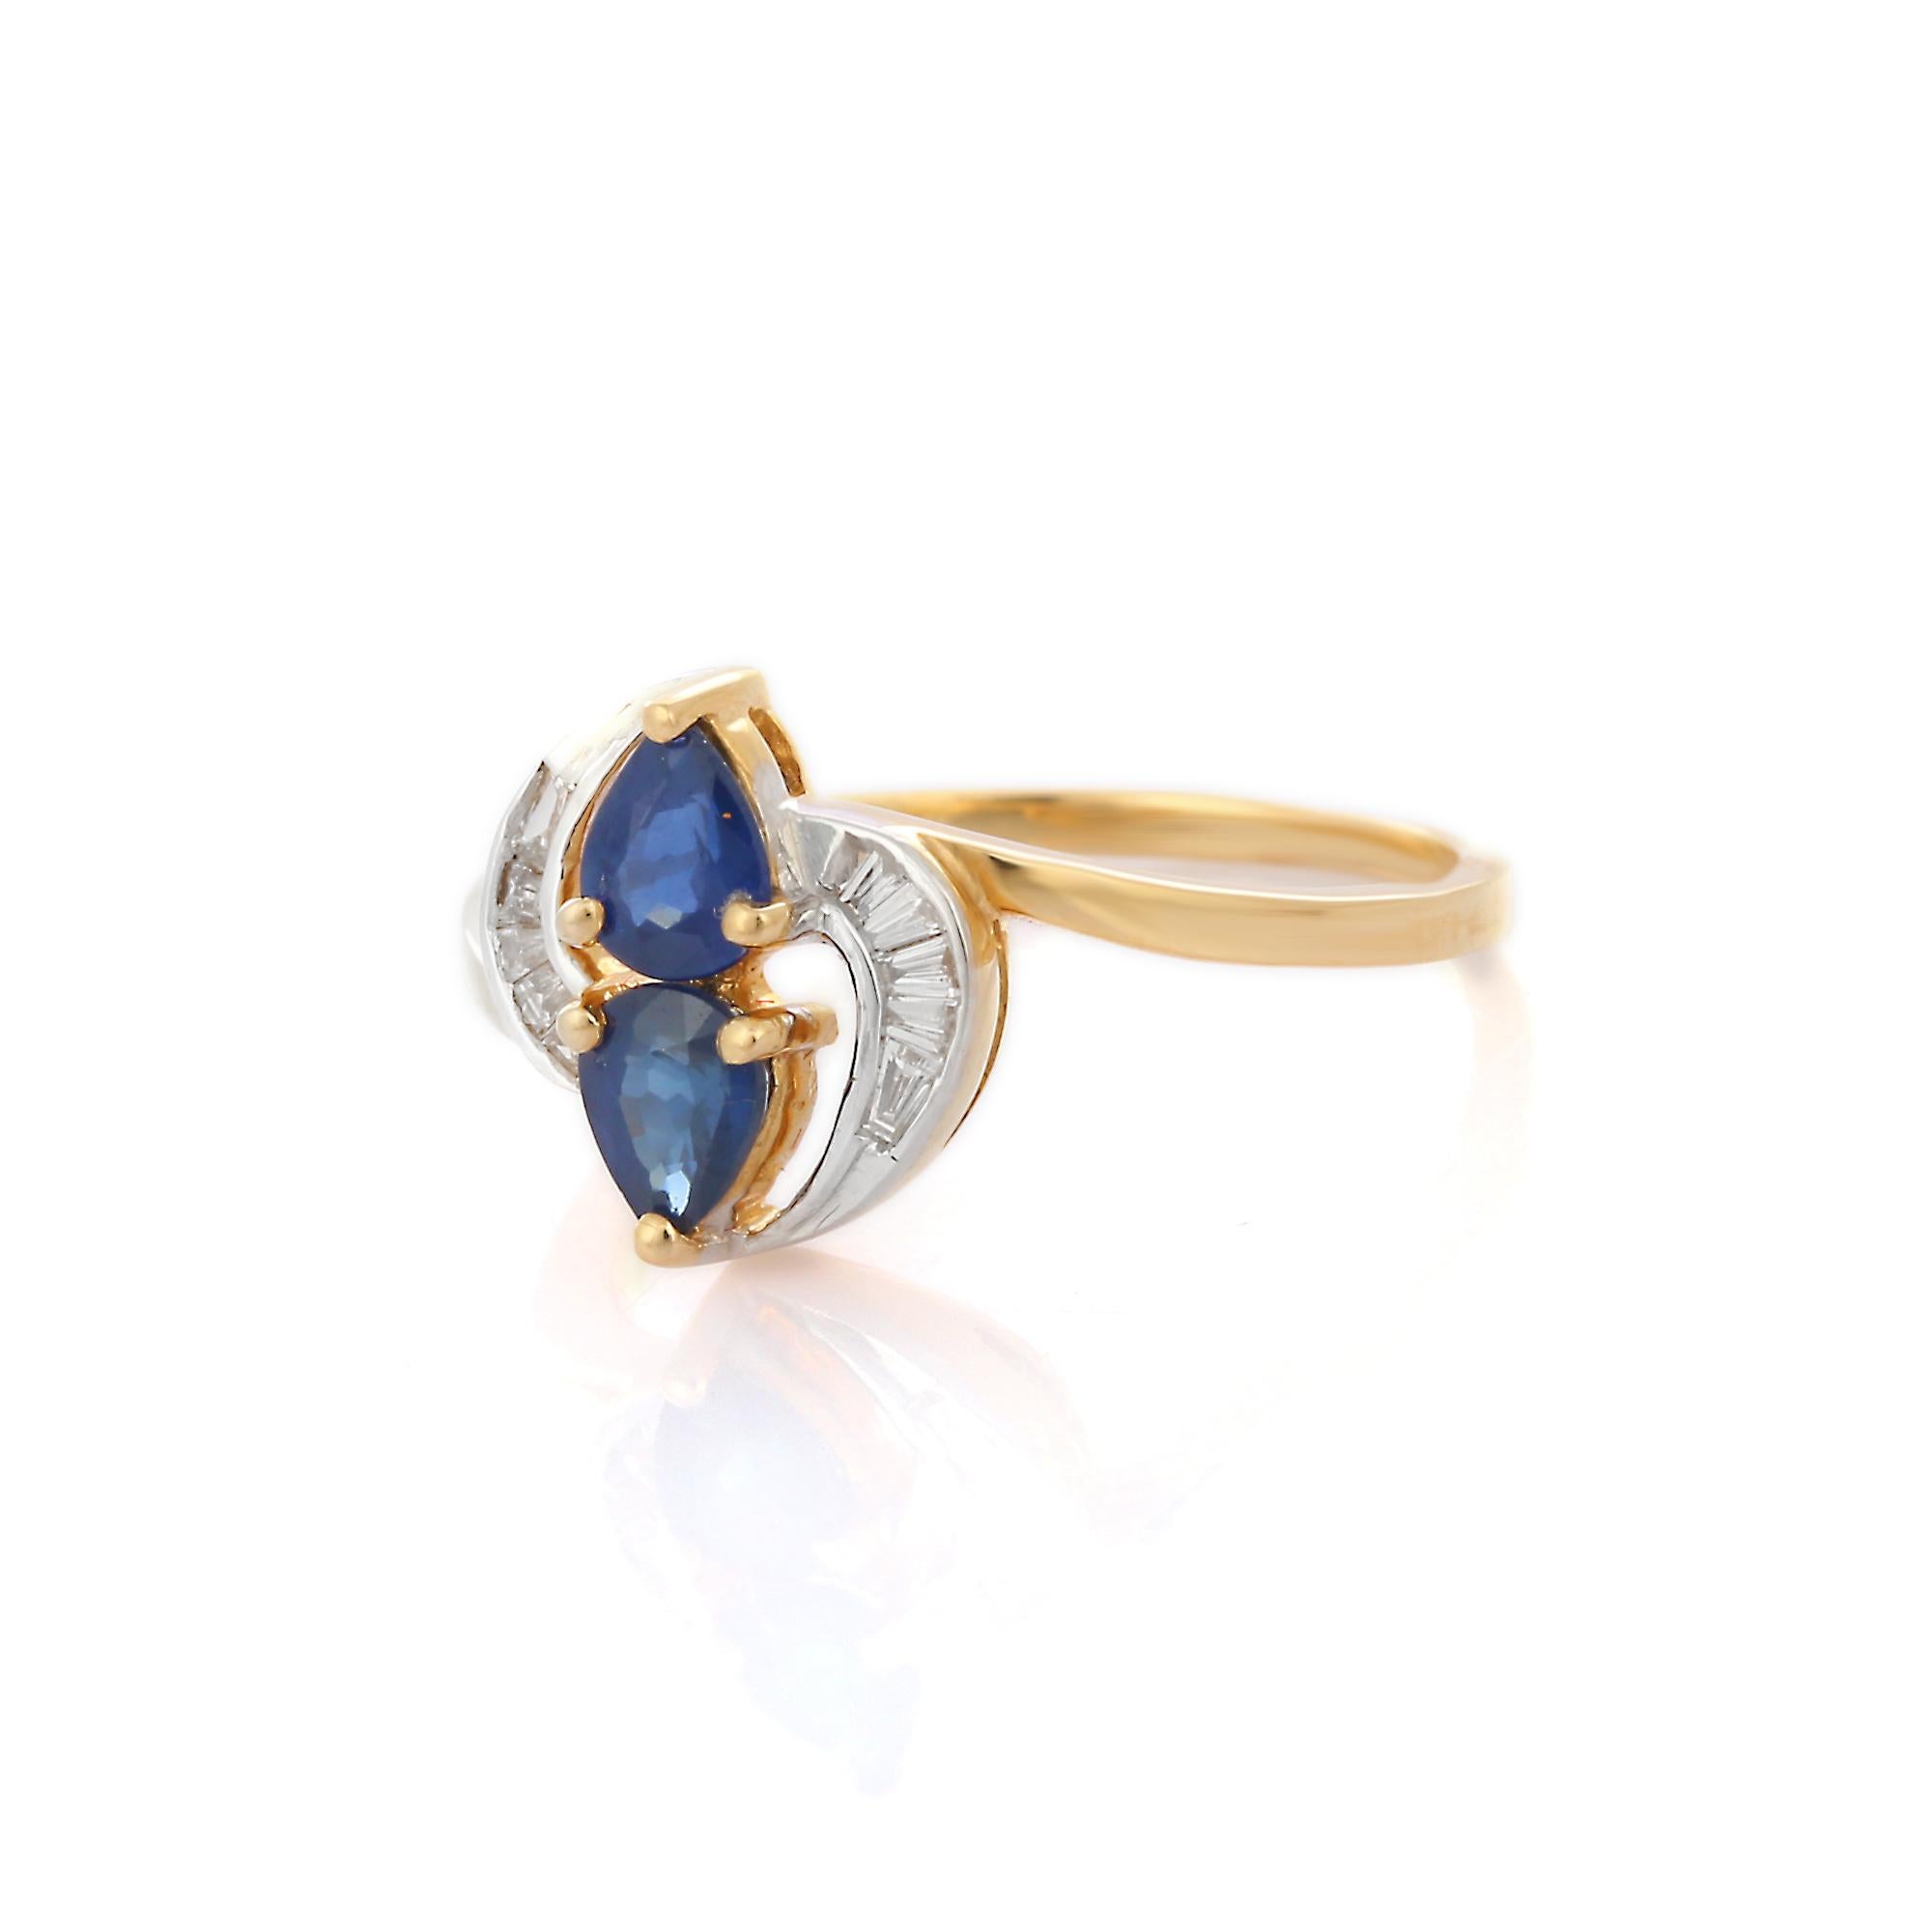 For Sale:  Natural Blue Sapphire Bridal Ring in 18K Yellow Gold with Diamonds 3